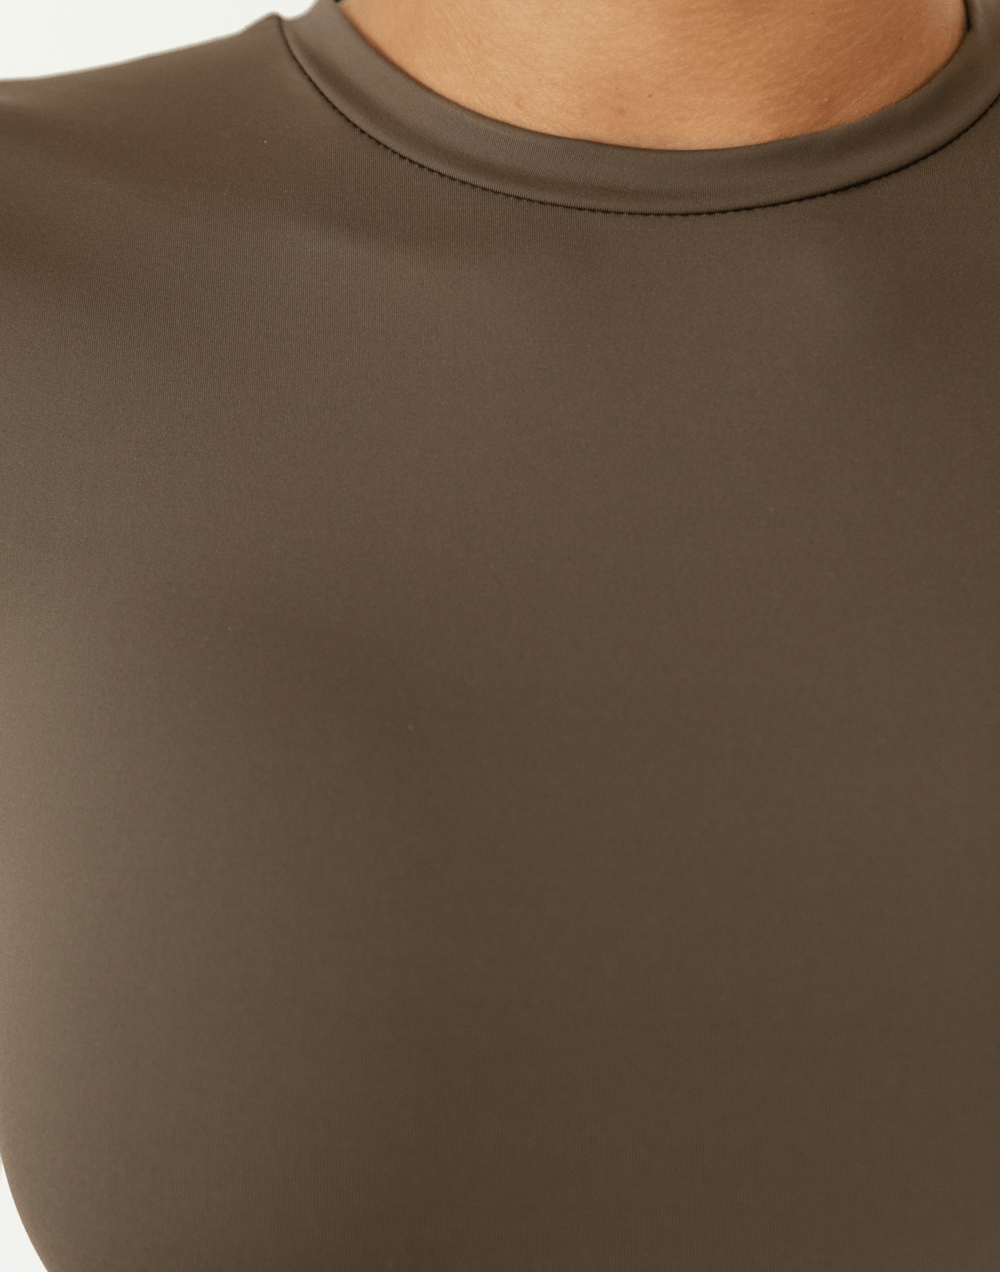 Cobie Top (Brown) - Brown Basic Top - Women's Top - Charcoal Clothing